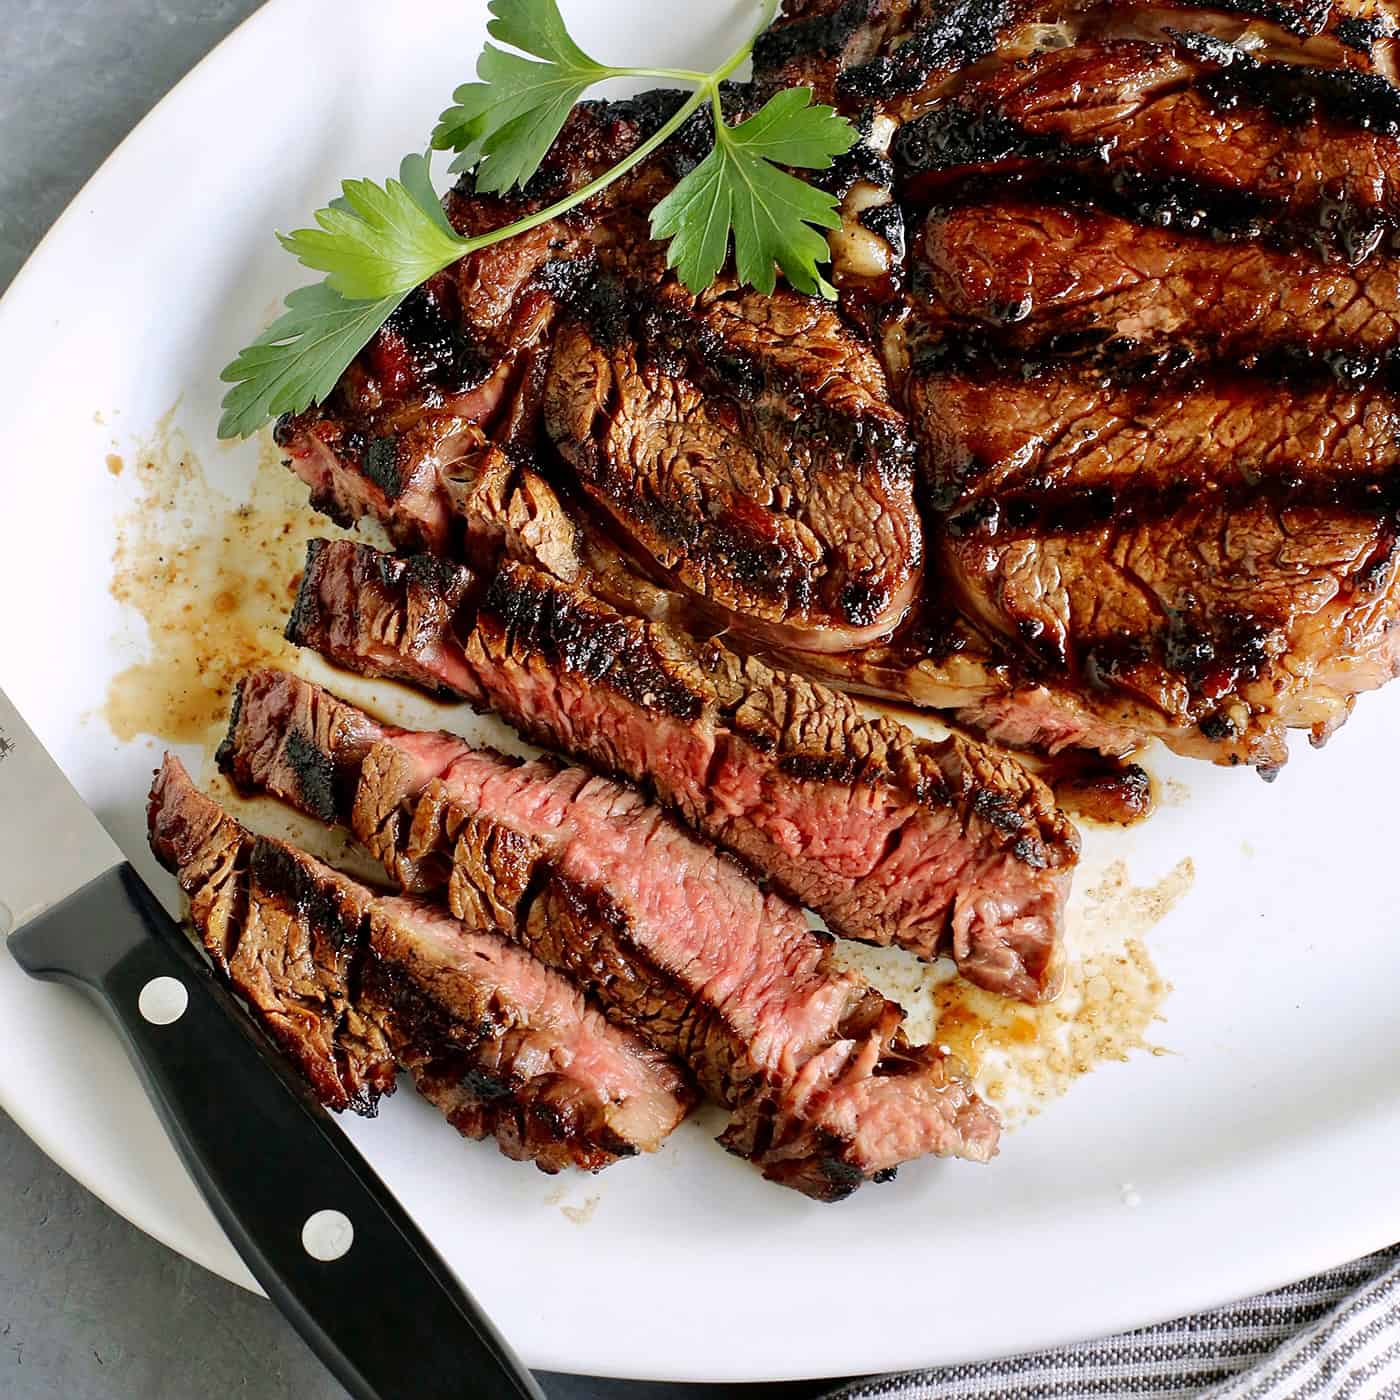 Grill Like a Pro: 5 Tips to Serve Up Ultra-Juicy Meat This Summer